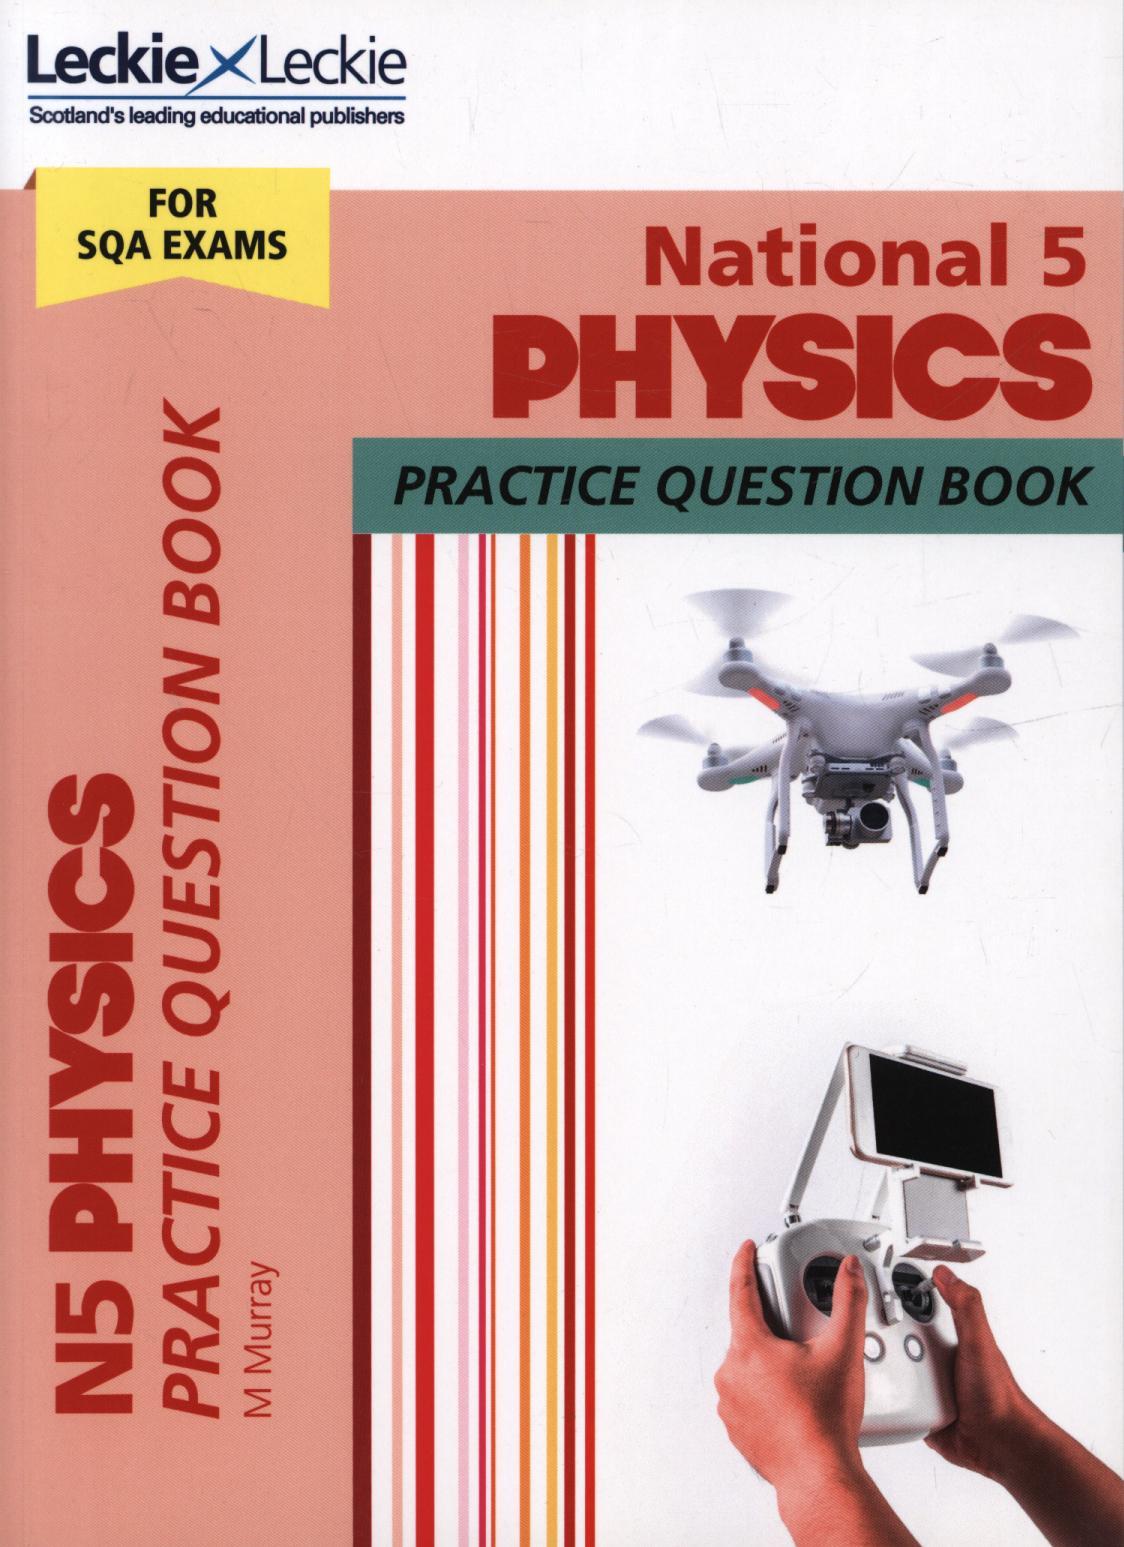 National 5 Physics Practice Question Book for New 2019 Exams